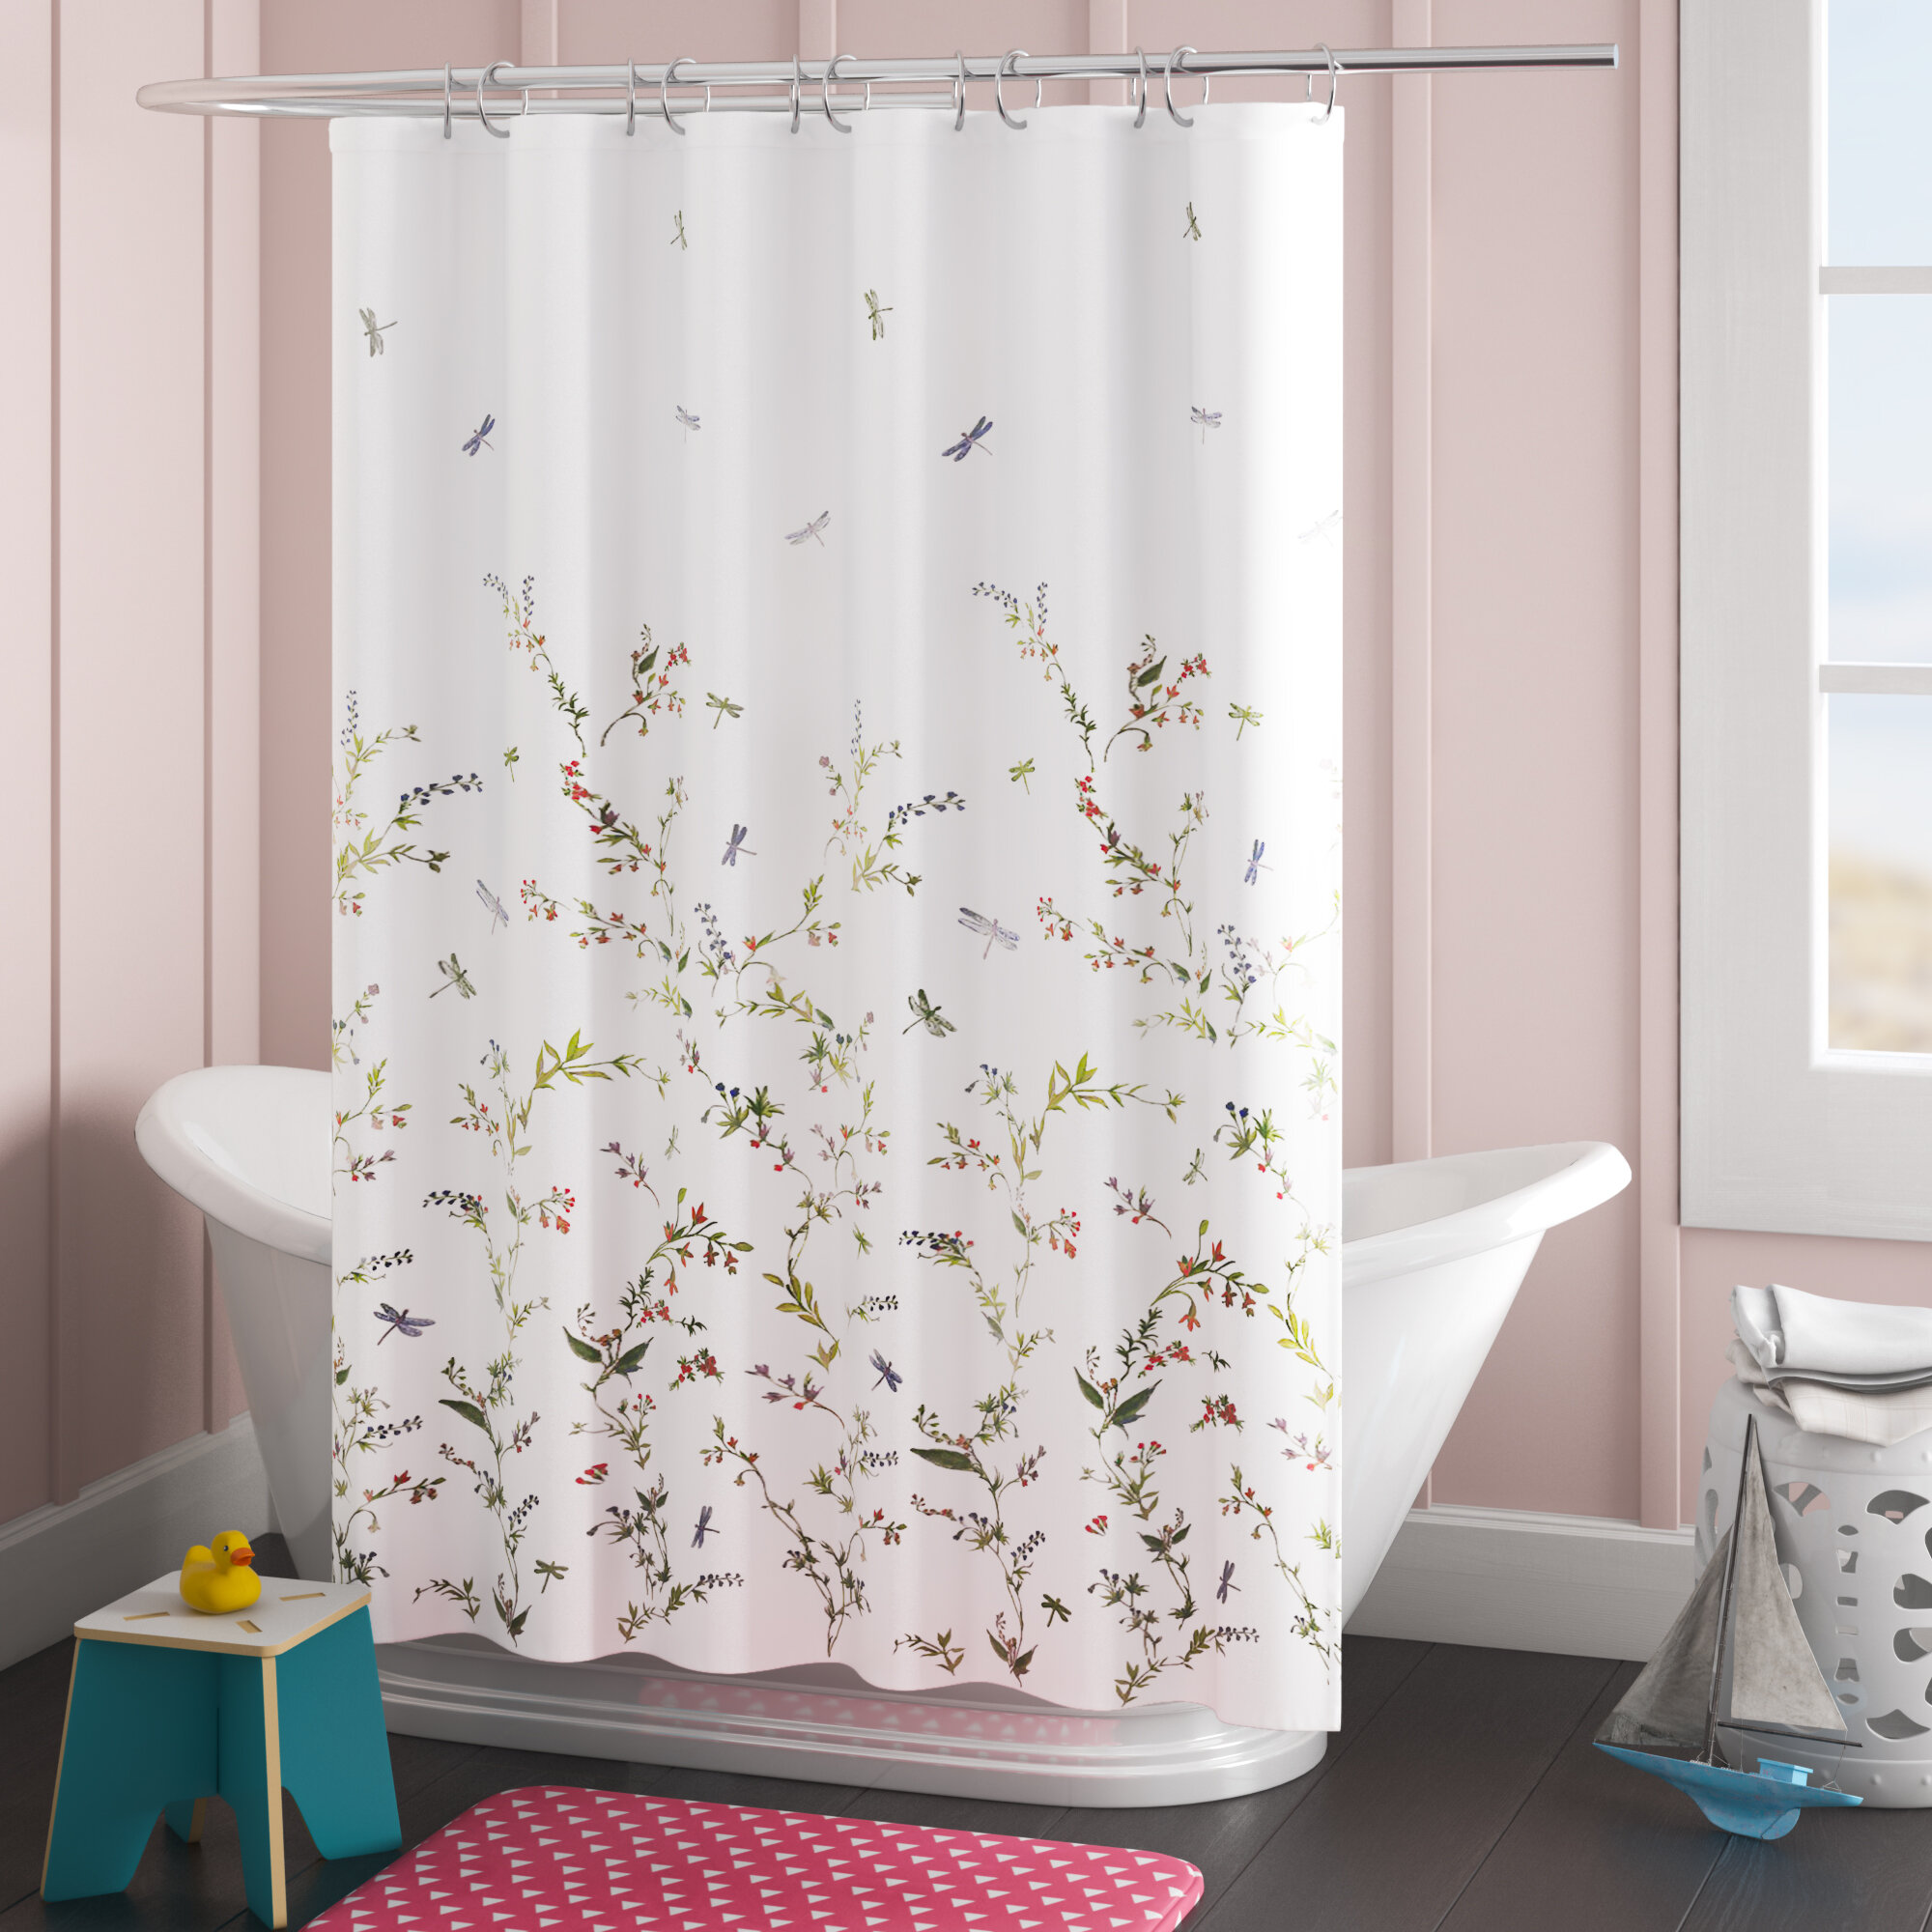 Shower fabric curtains 10yards